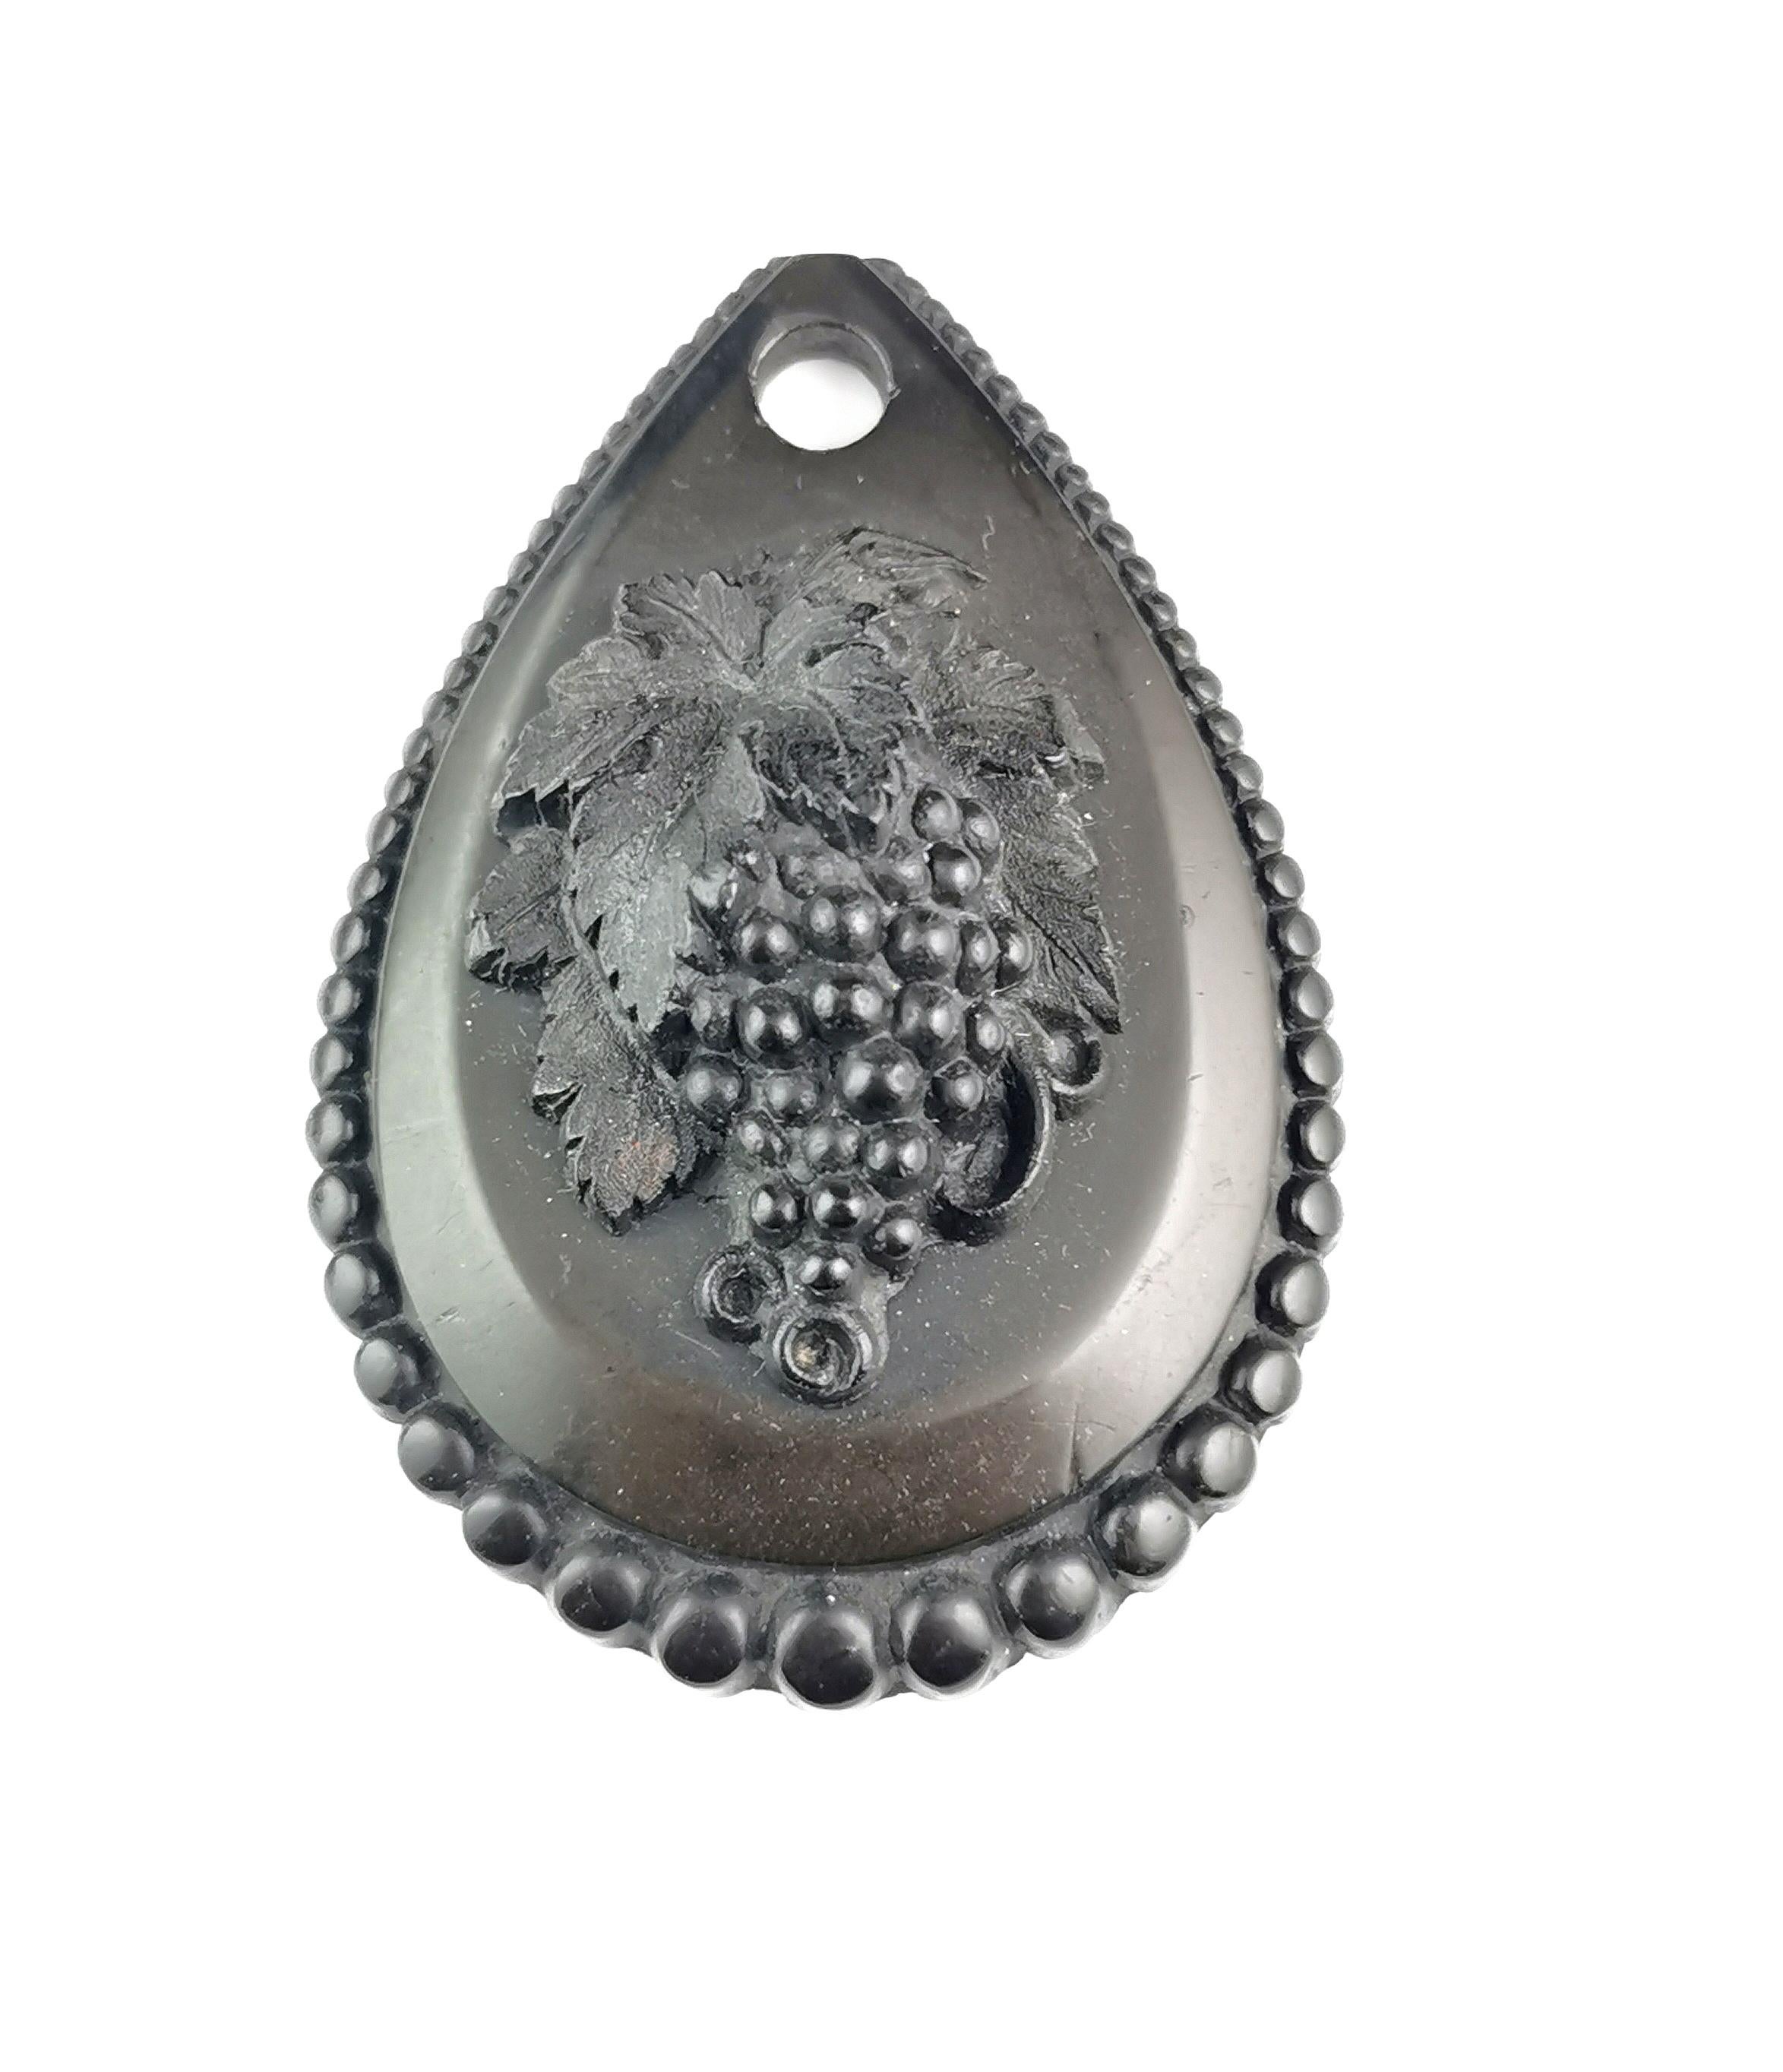 An attractive and interesting antique Victorian grapes pendant.

The pendant is crafted in rich black Vulcanite and it a teardrop shaped pendant with a beaded border and an applied central motif of a bunch of grapes.

It has a wonderful 3d effect to